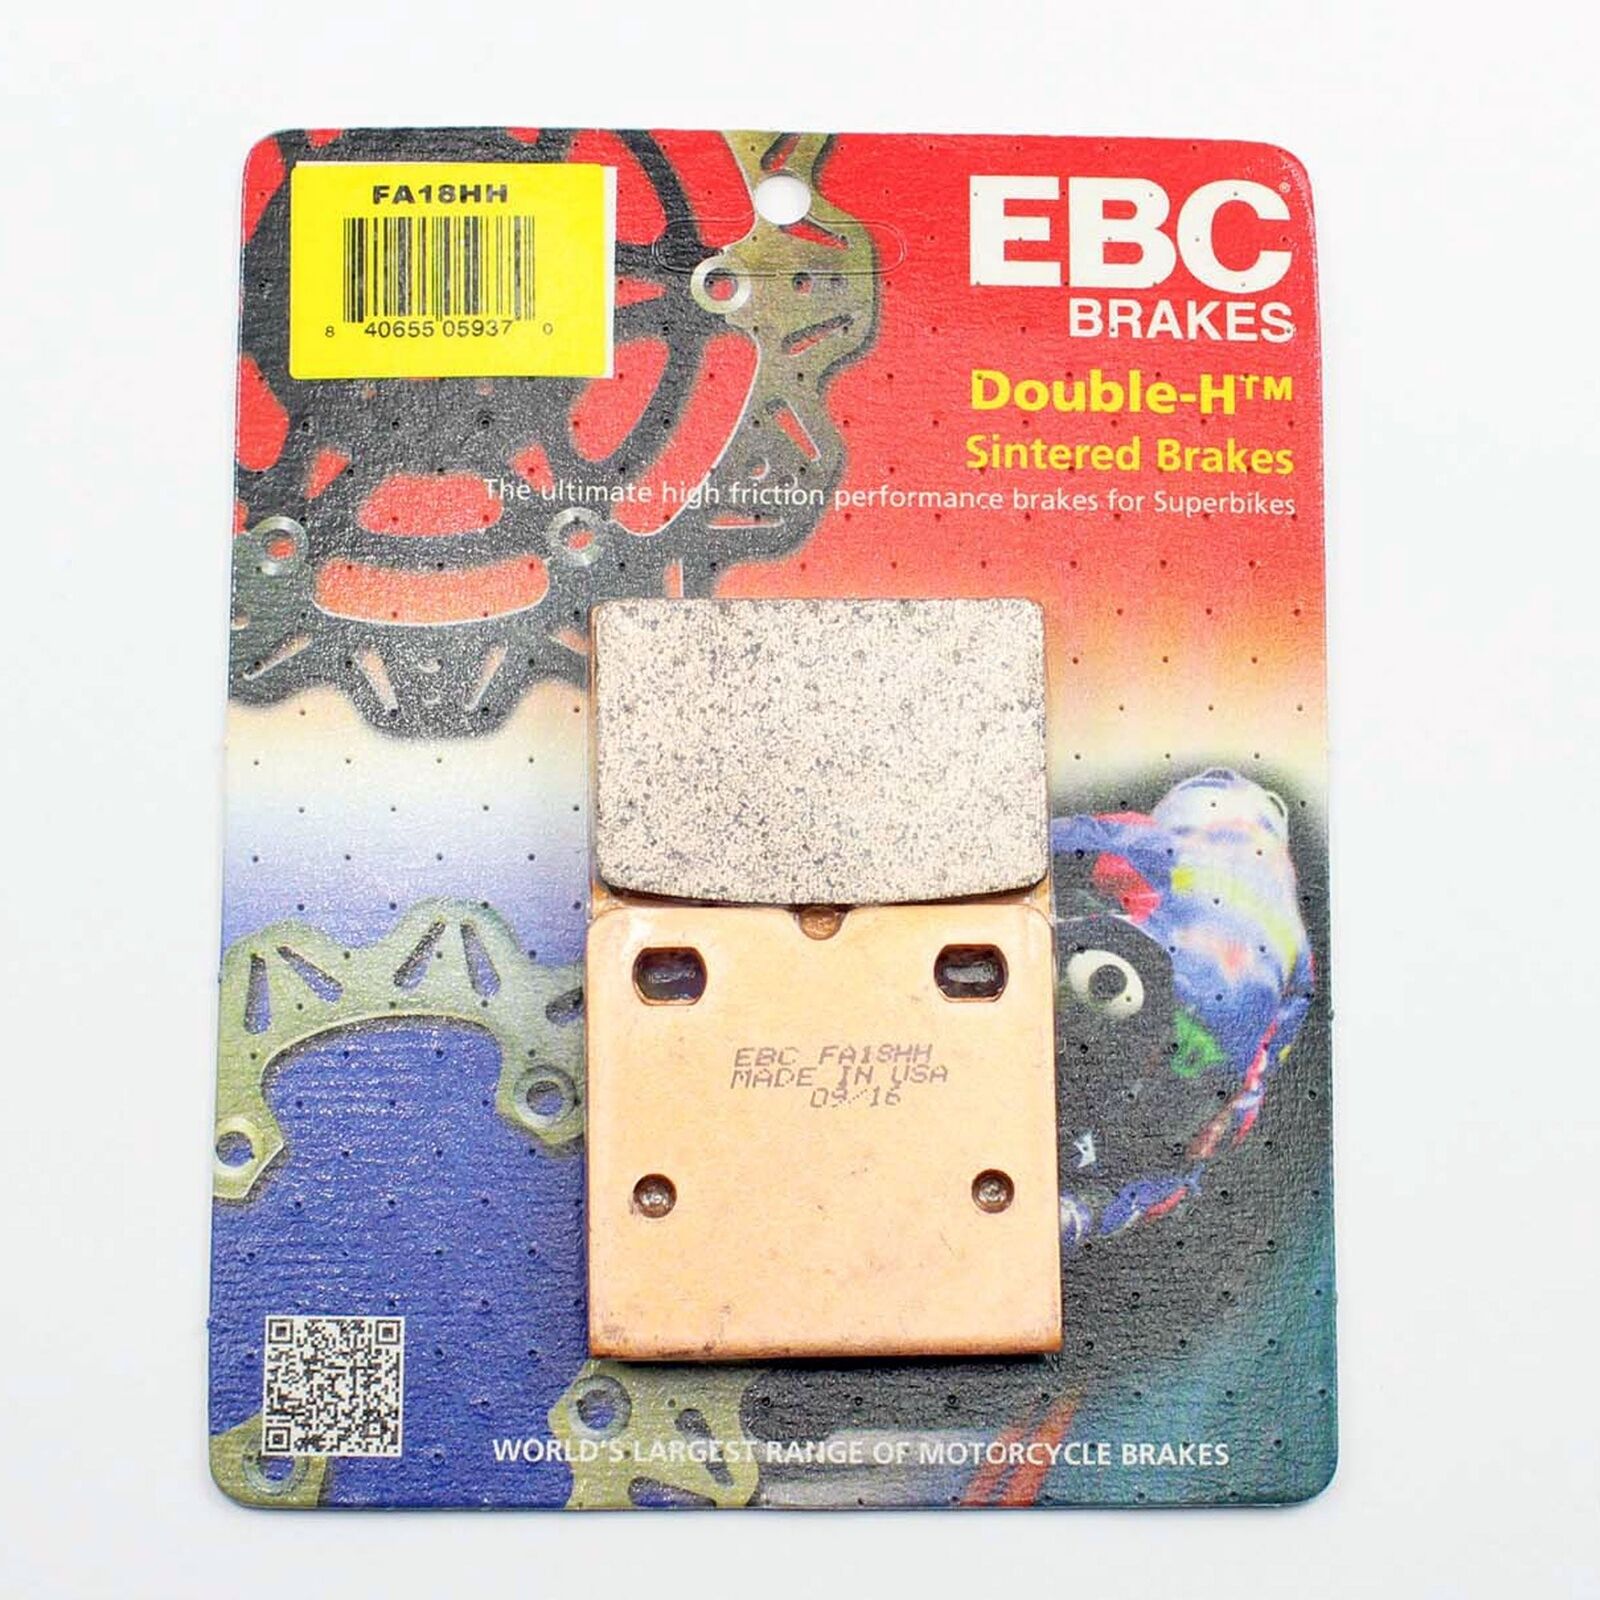 EBC FA18HH Brake Pads HH Sintered Pads for Motorcycle - 1 Pair